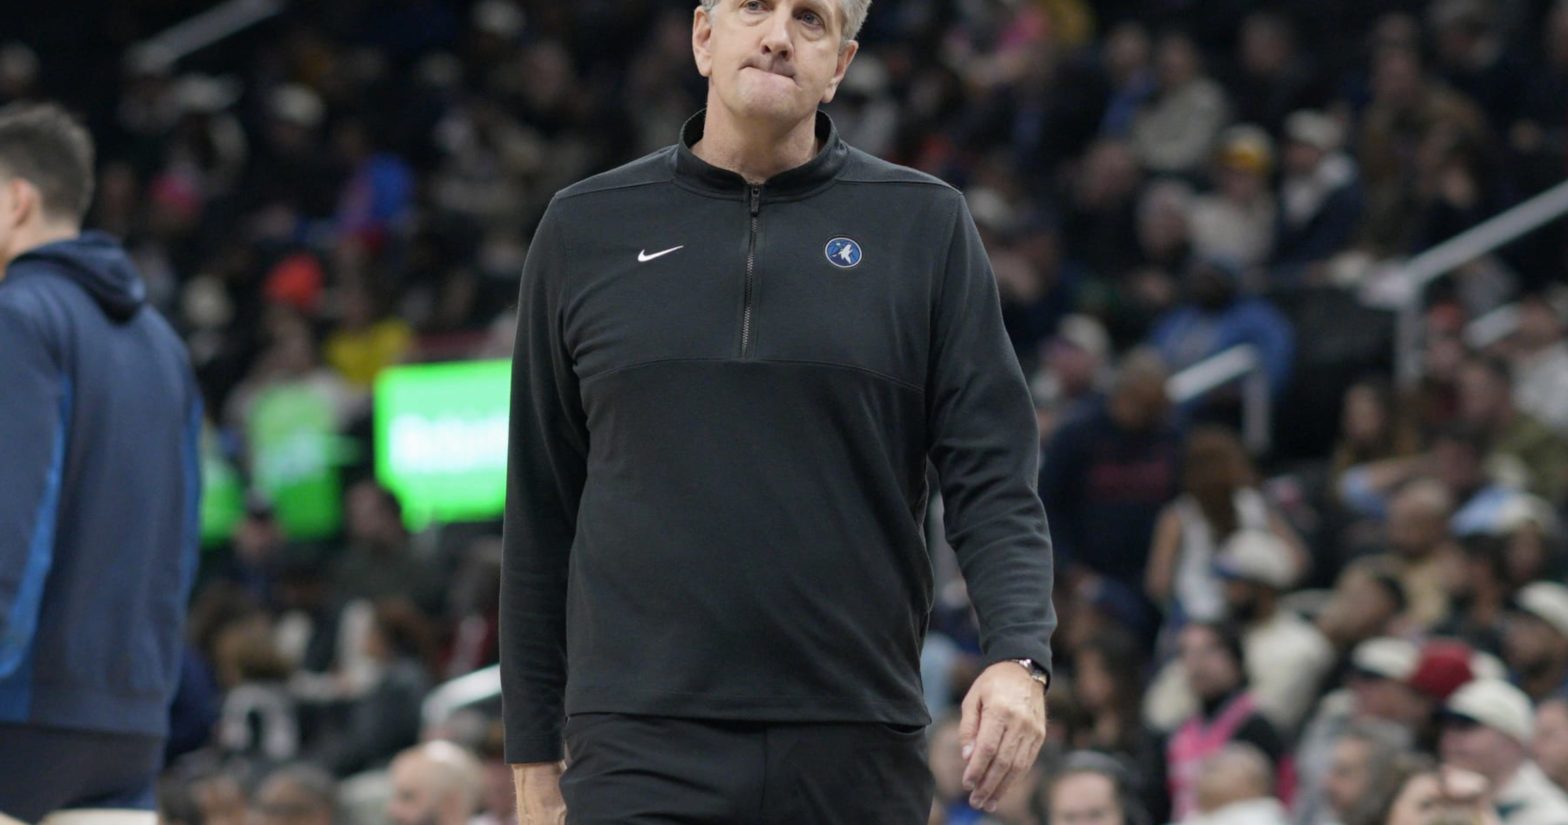 Chris Finch, Timberwolves Staff to Coach Western Conference in 2024 NBA All-Star Game